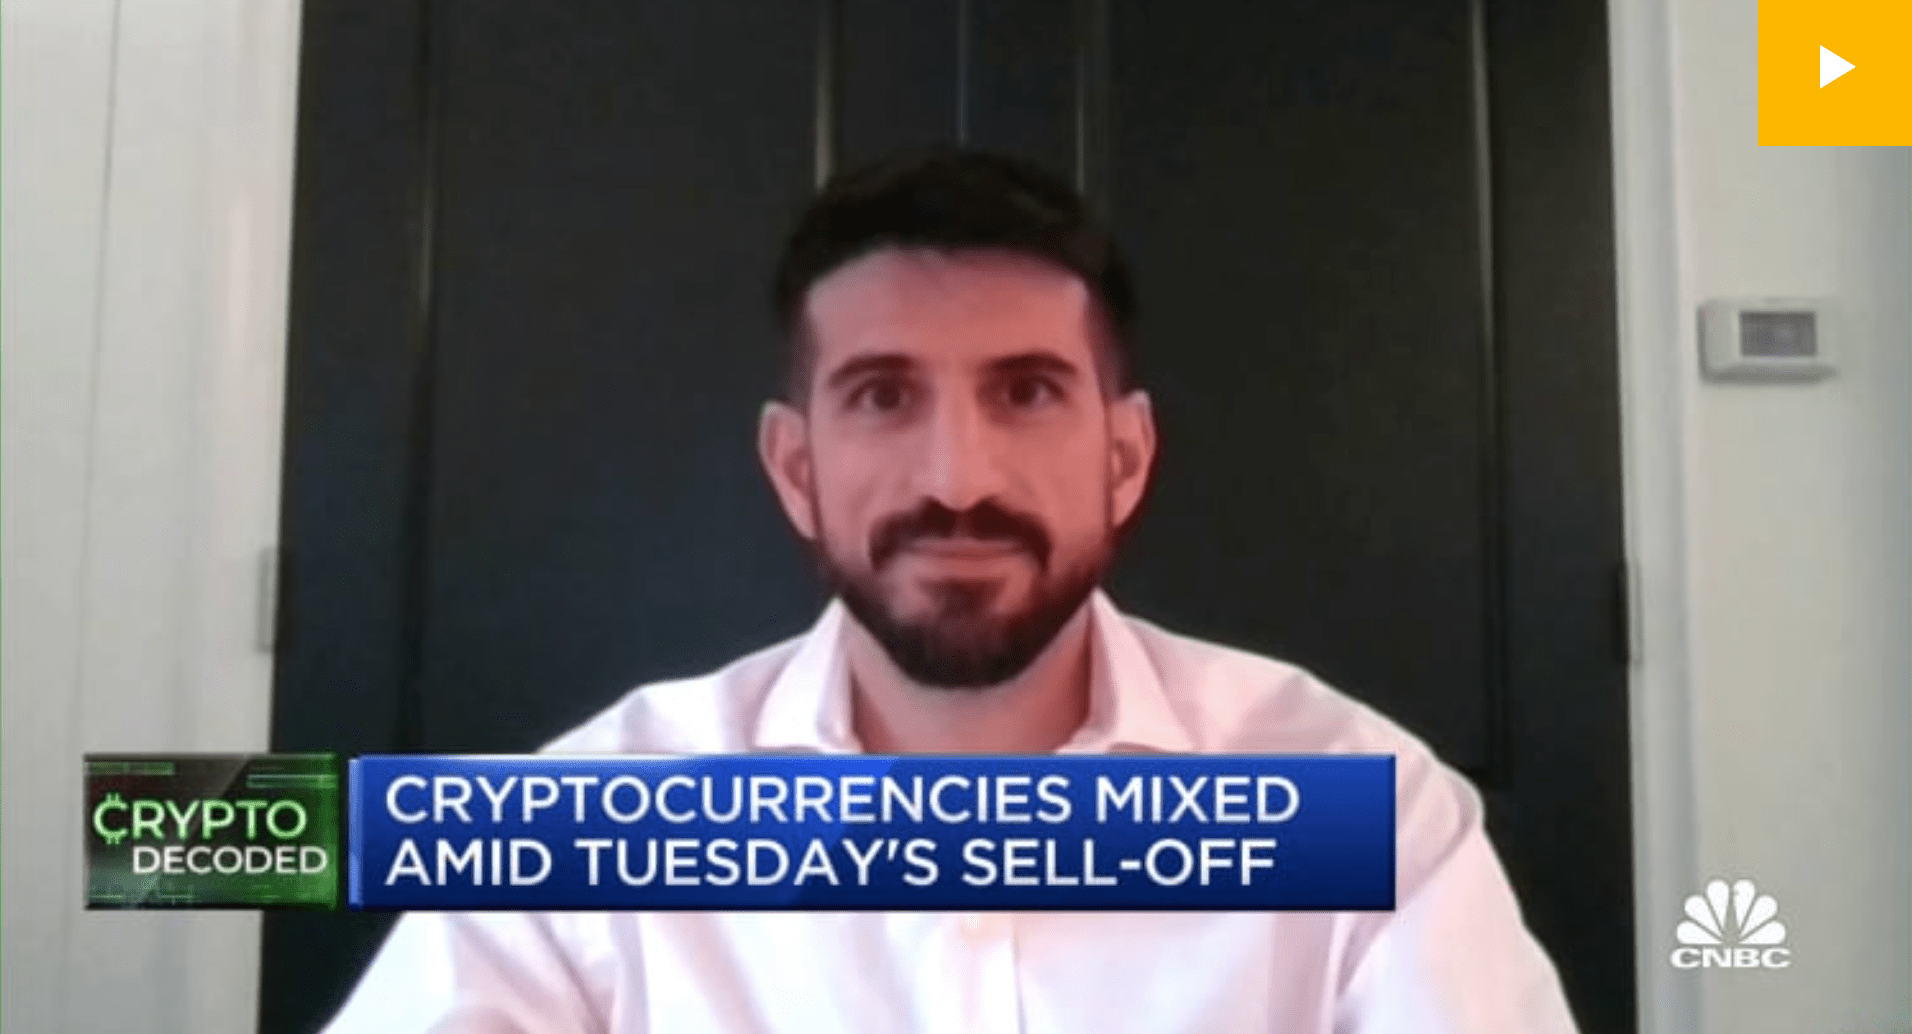 Paxos CEO Charles Cascarilla: Price action doesn’t mean cryptocurrencies’ fundamentals have changed